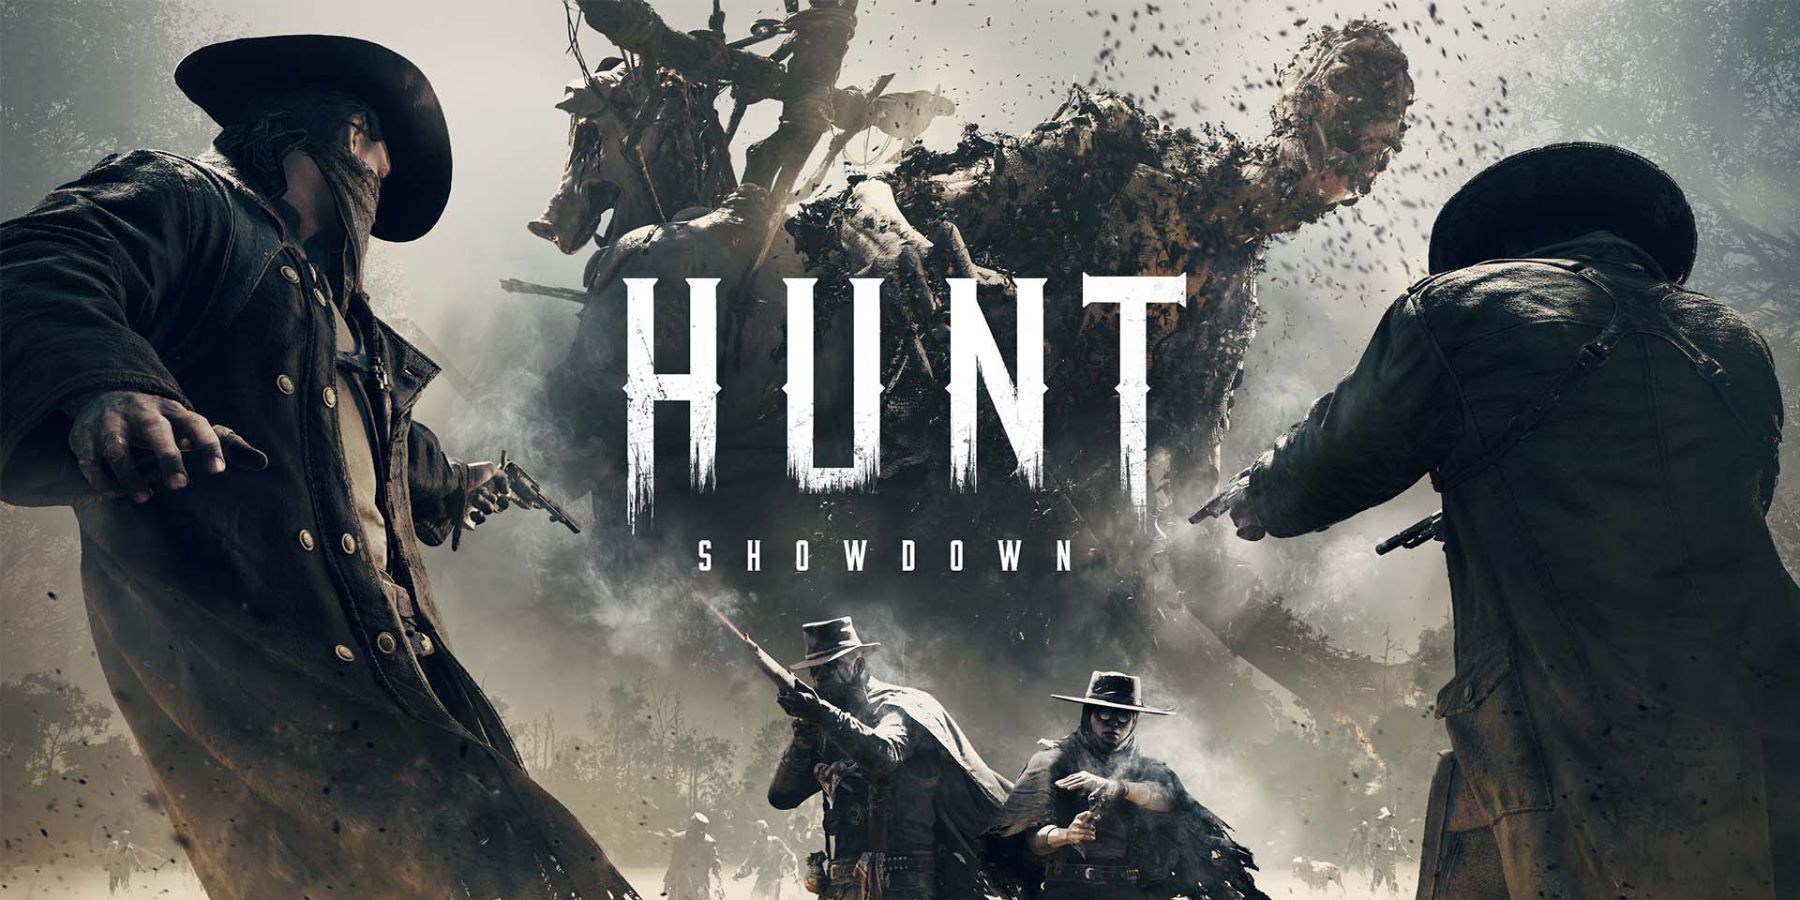 Hunt: Showdown's version 1.8.1 update adds a handful of new content to the game, including a quest system, new AI, and new weapons